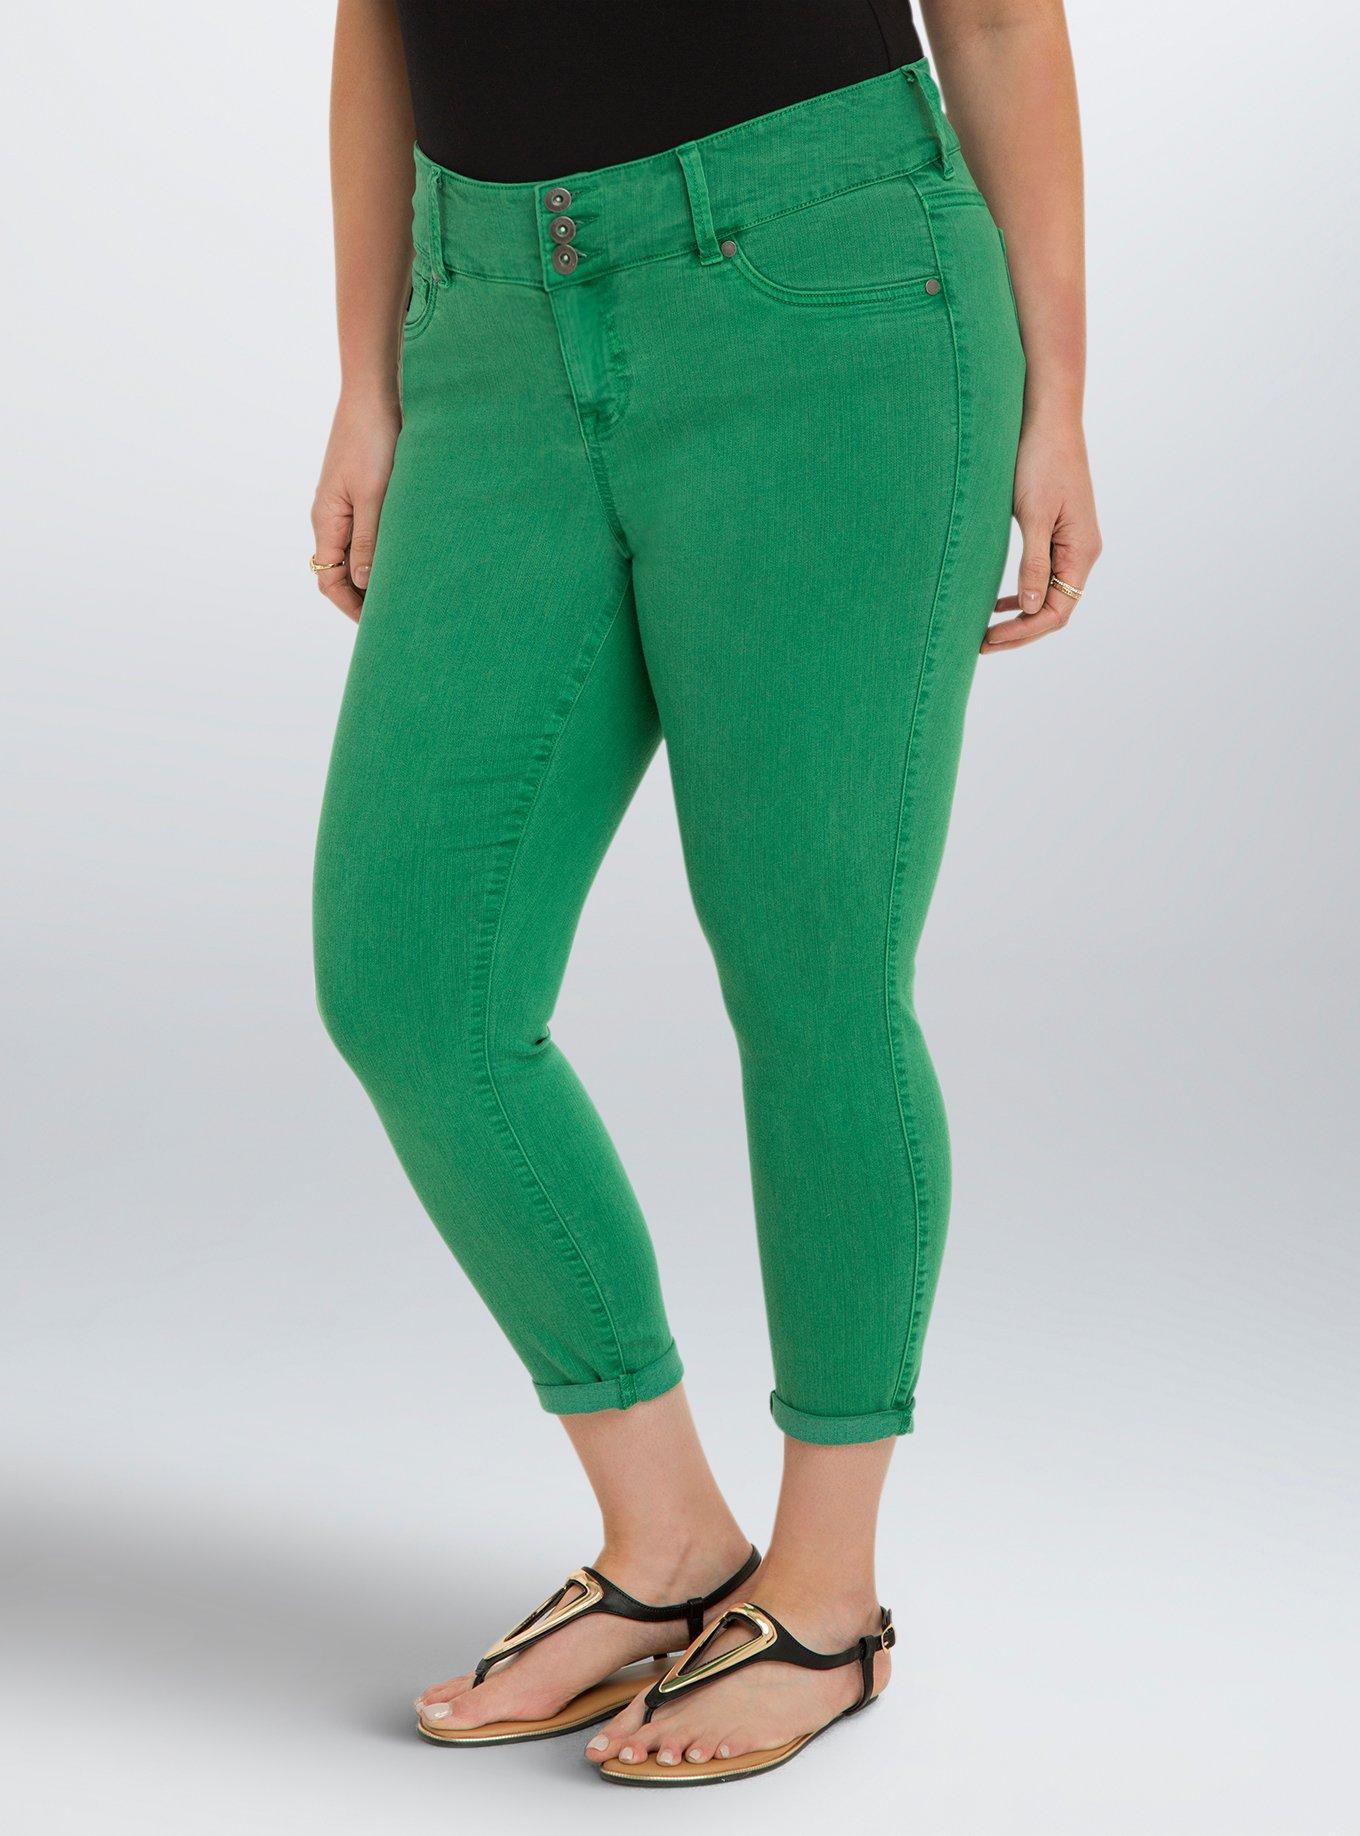 Green Plus Size Jeggings